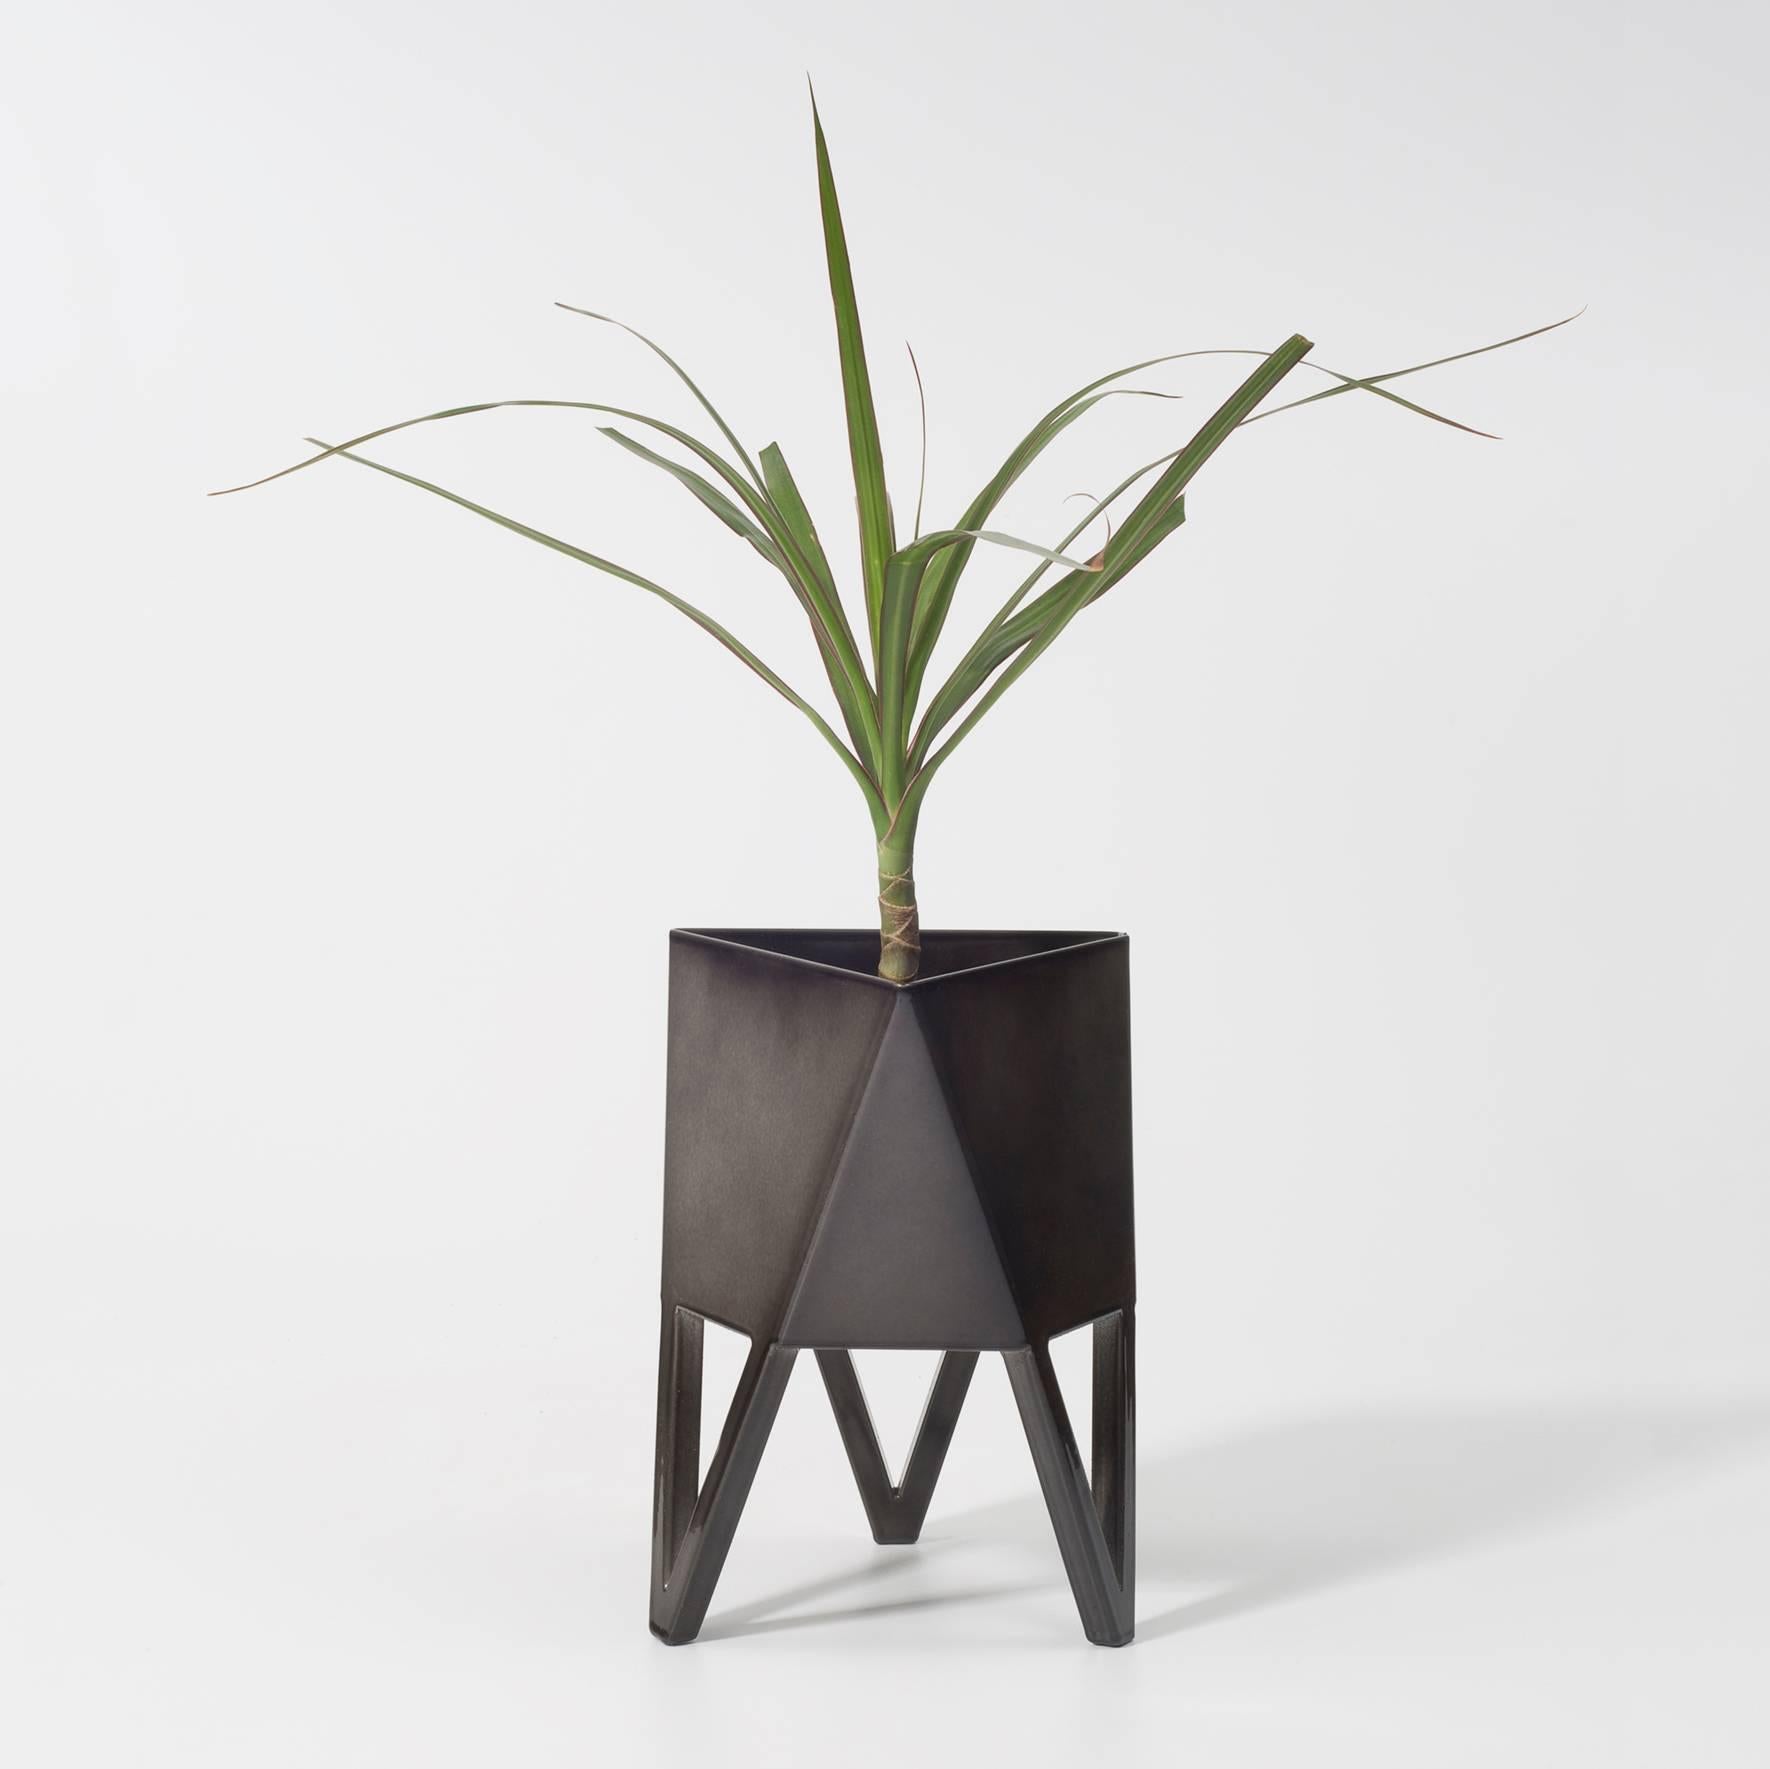 Deca Planter in Daffodil Yellow Steel, Mini, by Force/Collide 1